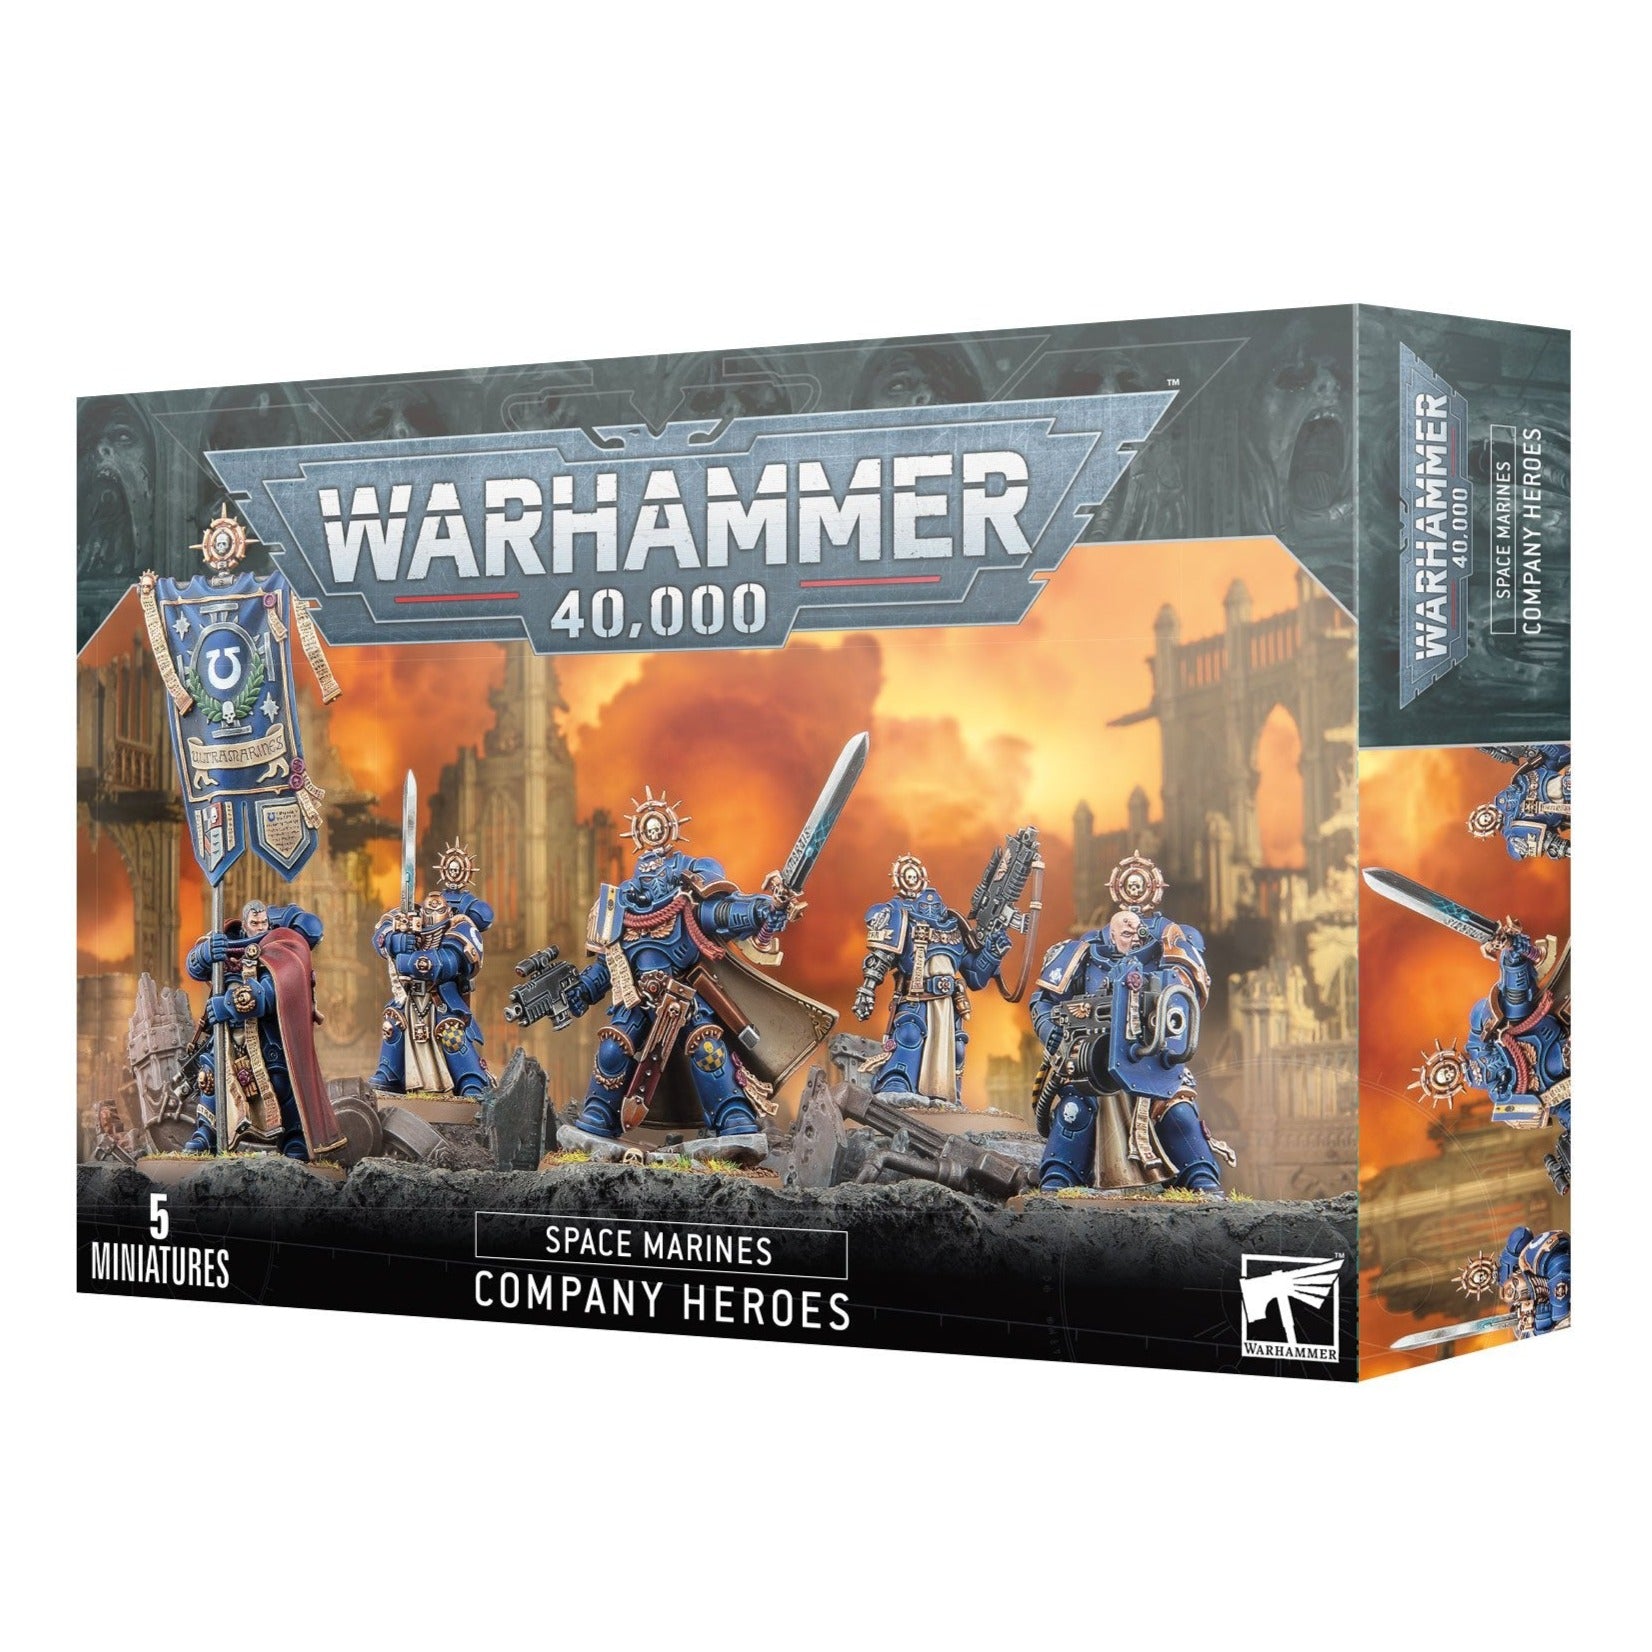 Space Marines: Company Heroes - Release Date 14/10/23 - Loaded Dice Barry Vale of Glamorgan CF64 3HD